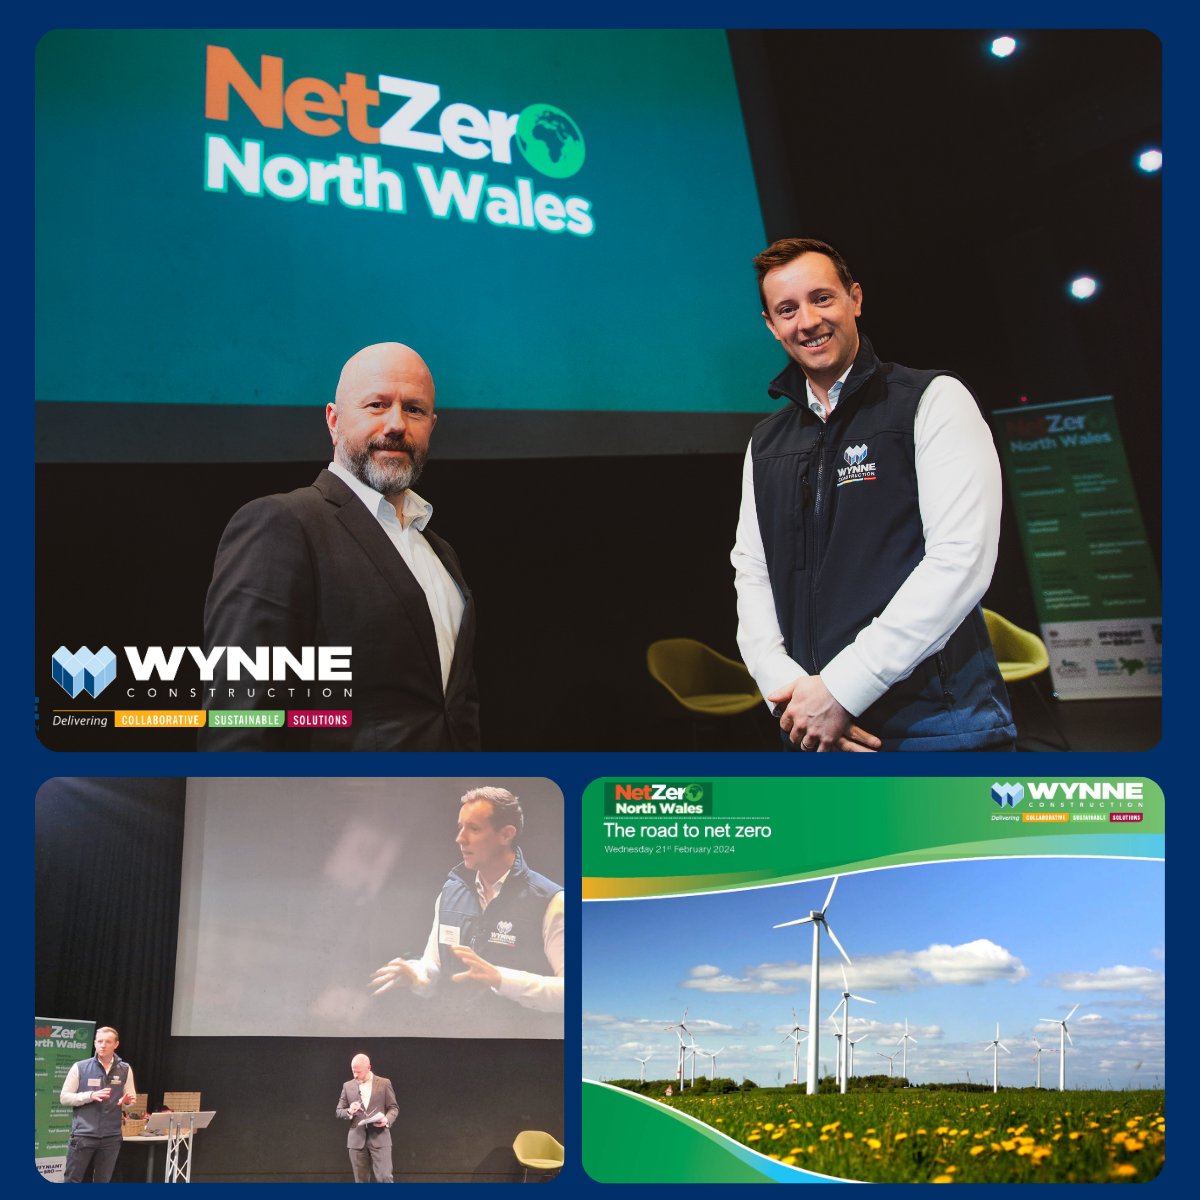 By 2050, the UK has pledged to reach #NetZero Here are some of our actions to support this goal: 🔹 95% of waste from sites was diverted from landfill 🔹 Head office now powered by 100% @sserenewables green energy 🔹 Reduced electricity & gas use by 10% and 50% over 5 years